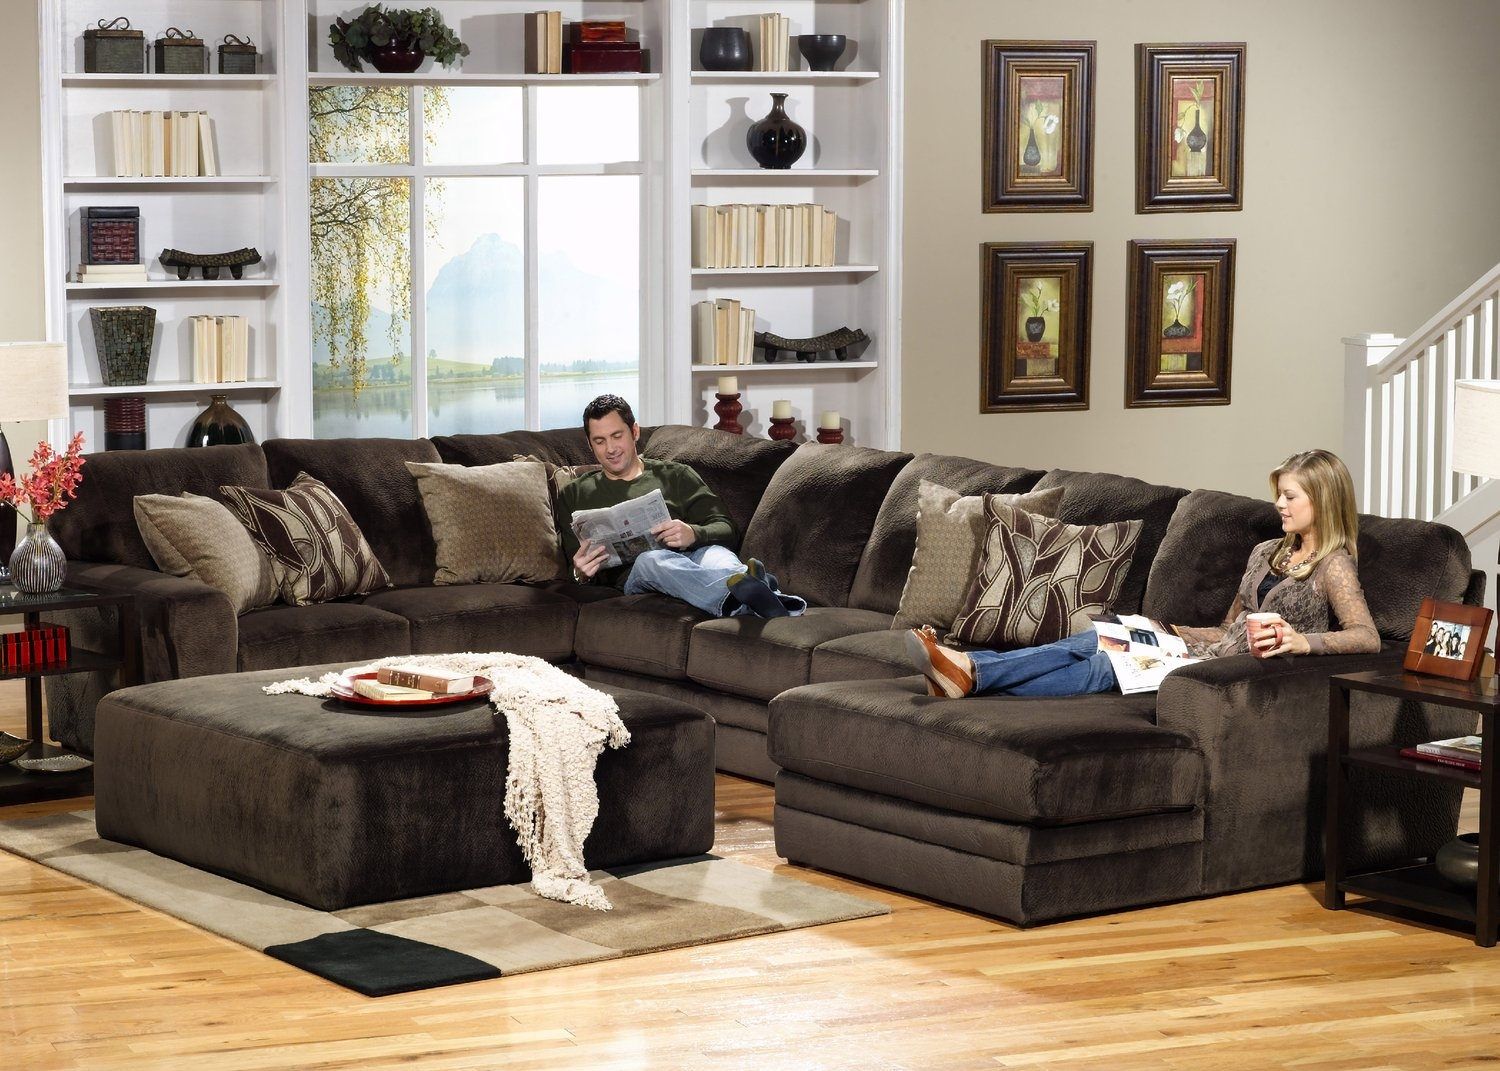 Rainier 3 Piece Sectional | Hom Furniture For Duluth Mn Sectional Sofas (View 4 of 10)